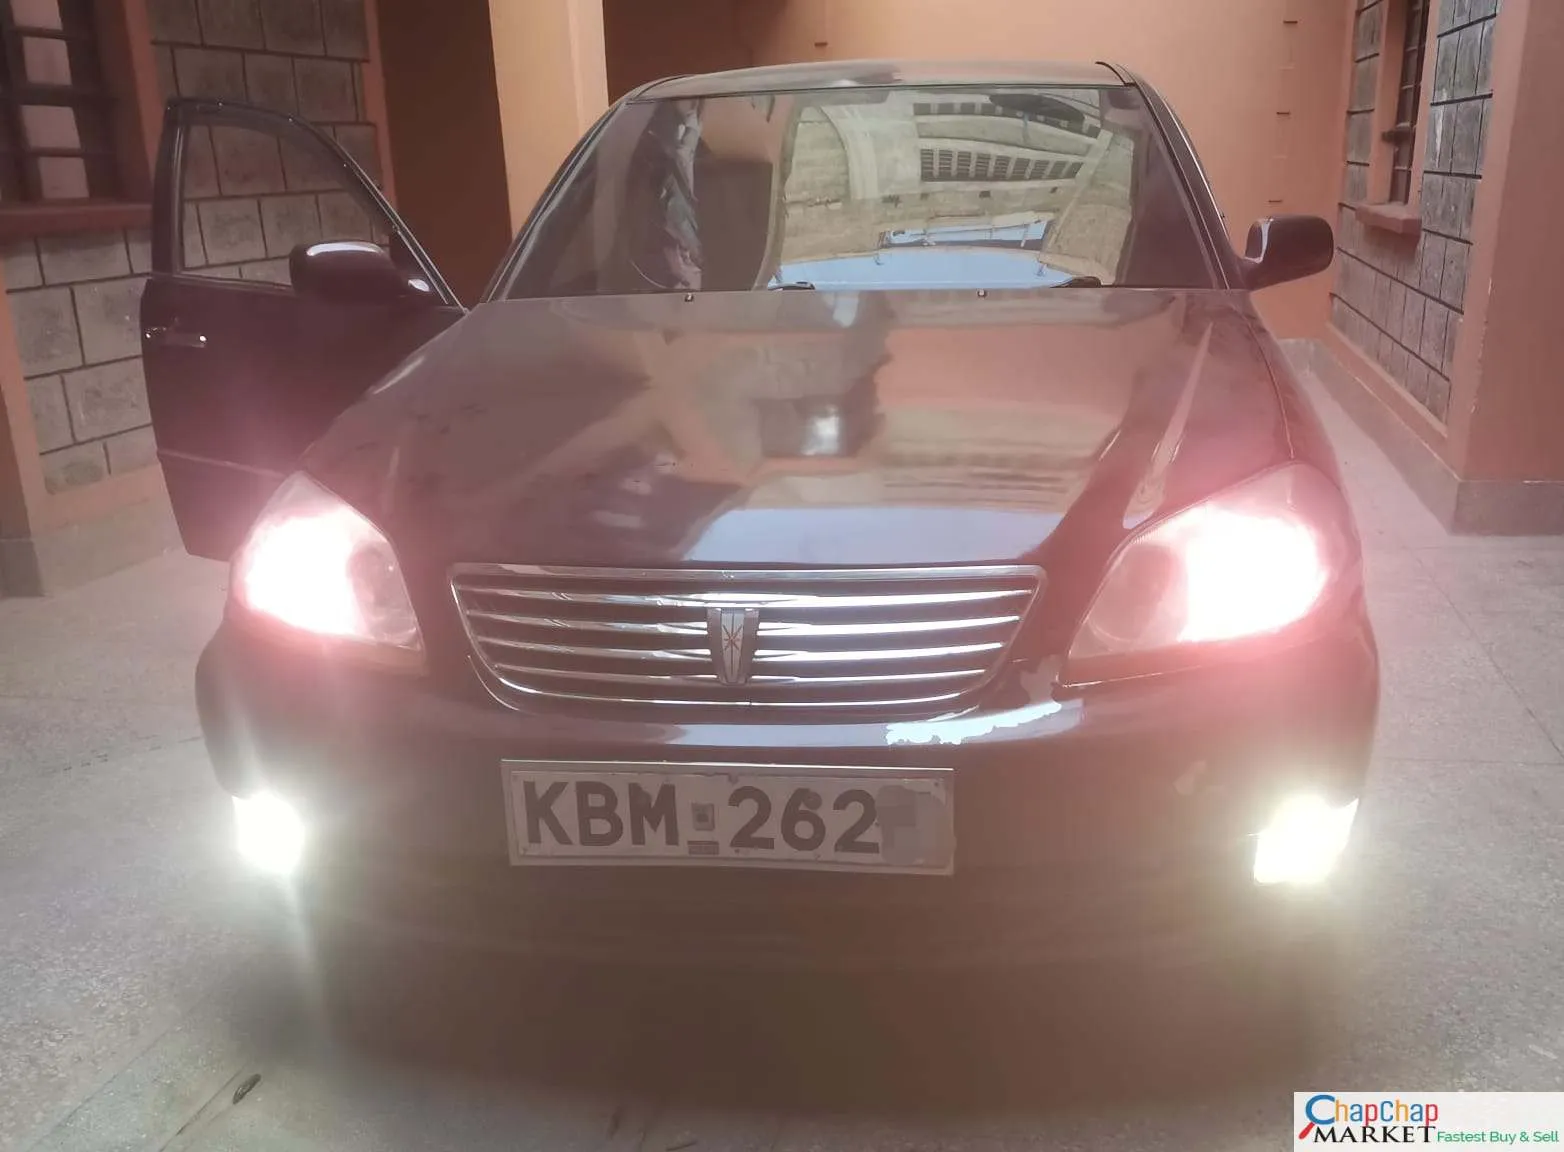 Toyota Mark II 2 for sale in Kenya You Pay 30% Deposit Trade in OK EXCLUSIVE 🚒(SOLD)